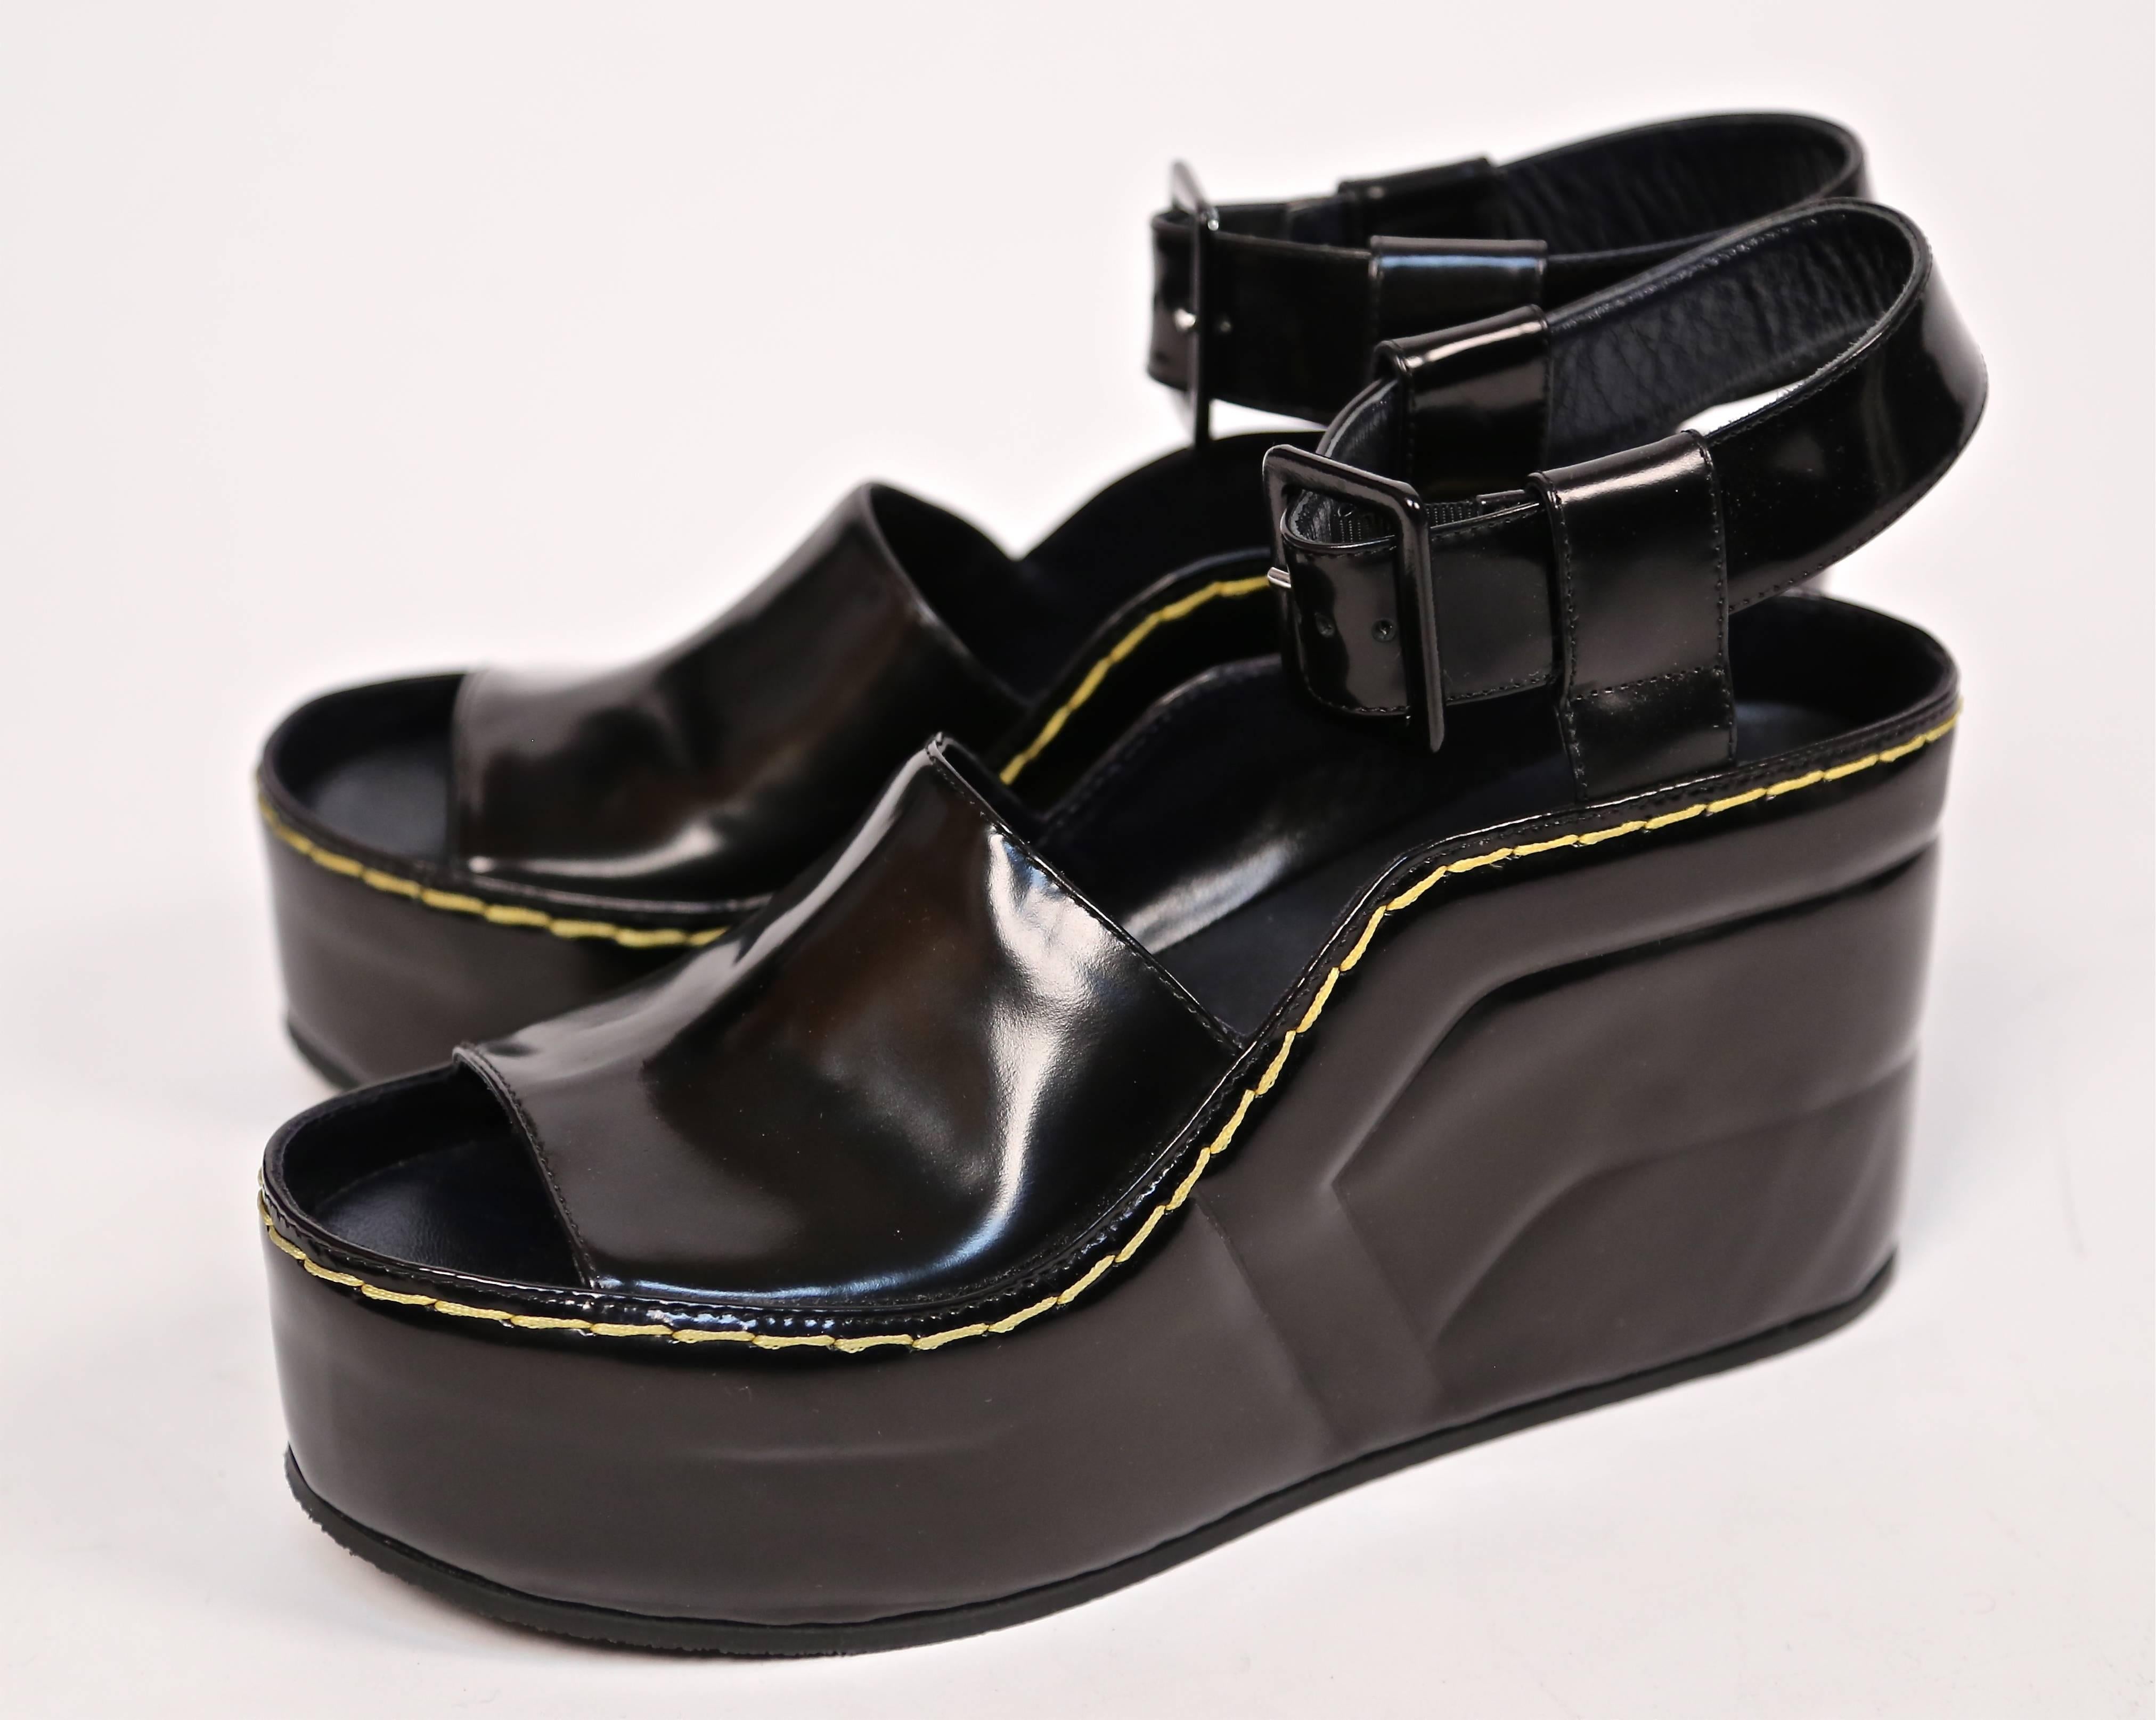  Black spazzolato leather wedge sandals with yellow top-stitching from Celine dating to fall 2014 as seen on the runway. Size 39. Insoles measure: 10.25